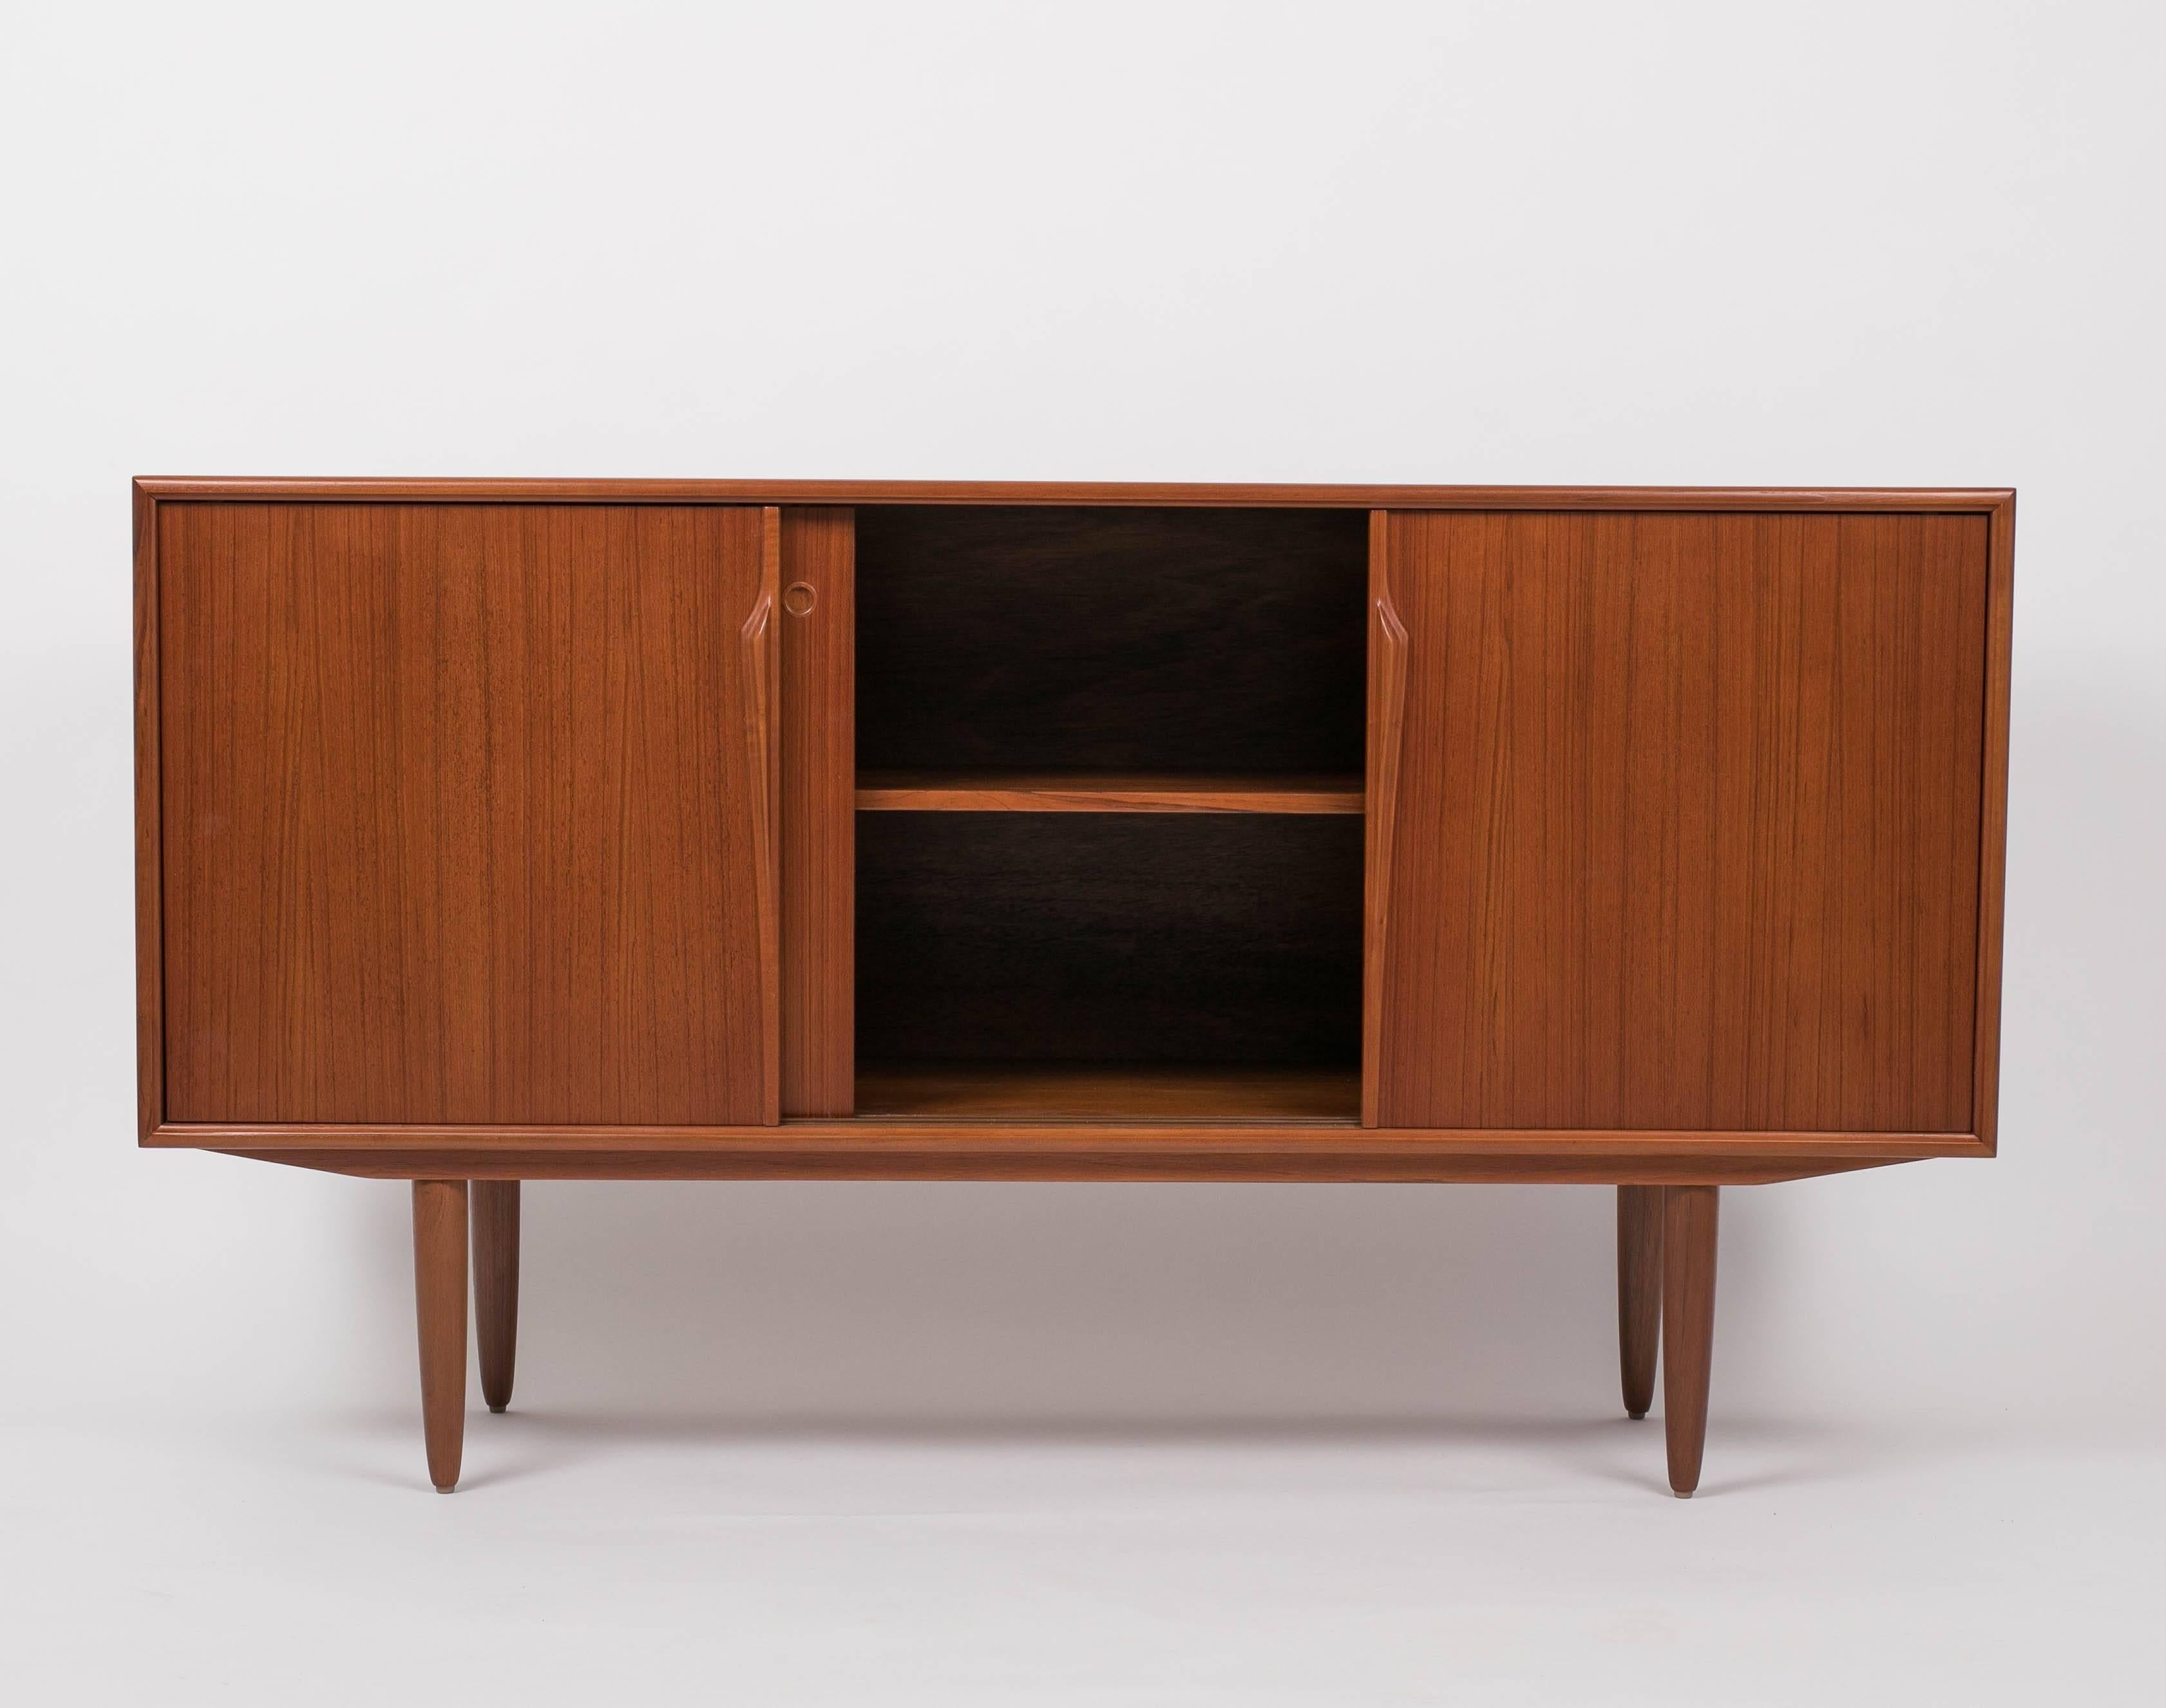 A Gunni Omann-designed credenza in teak wood. The compact piece has unusually high solid teak legs with a distinctive bullet shape and three sliding panels across its face. The outer doors have ridged pulls and slide freely along the length of the